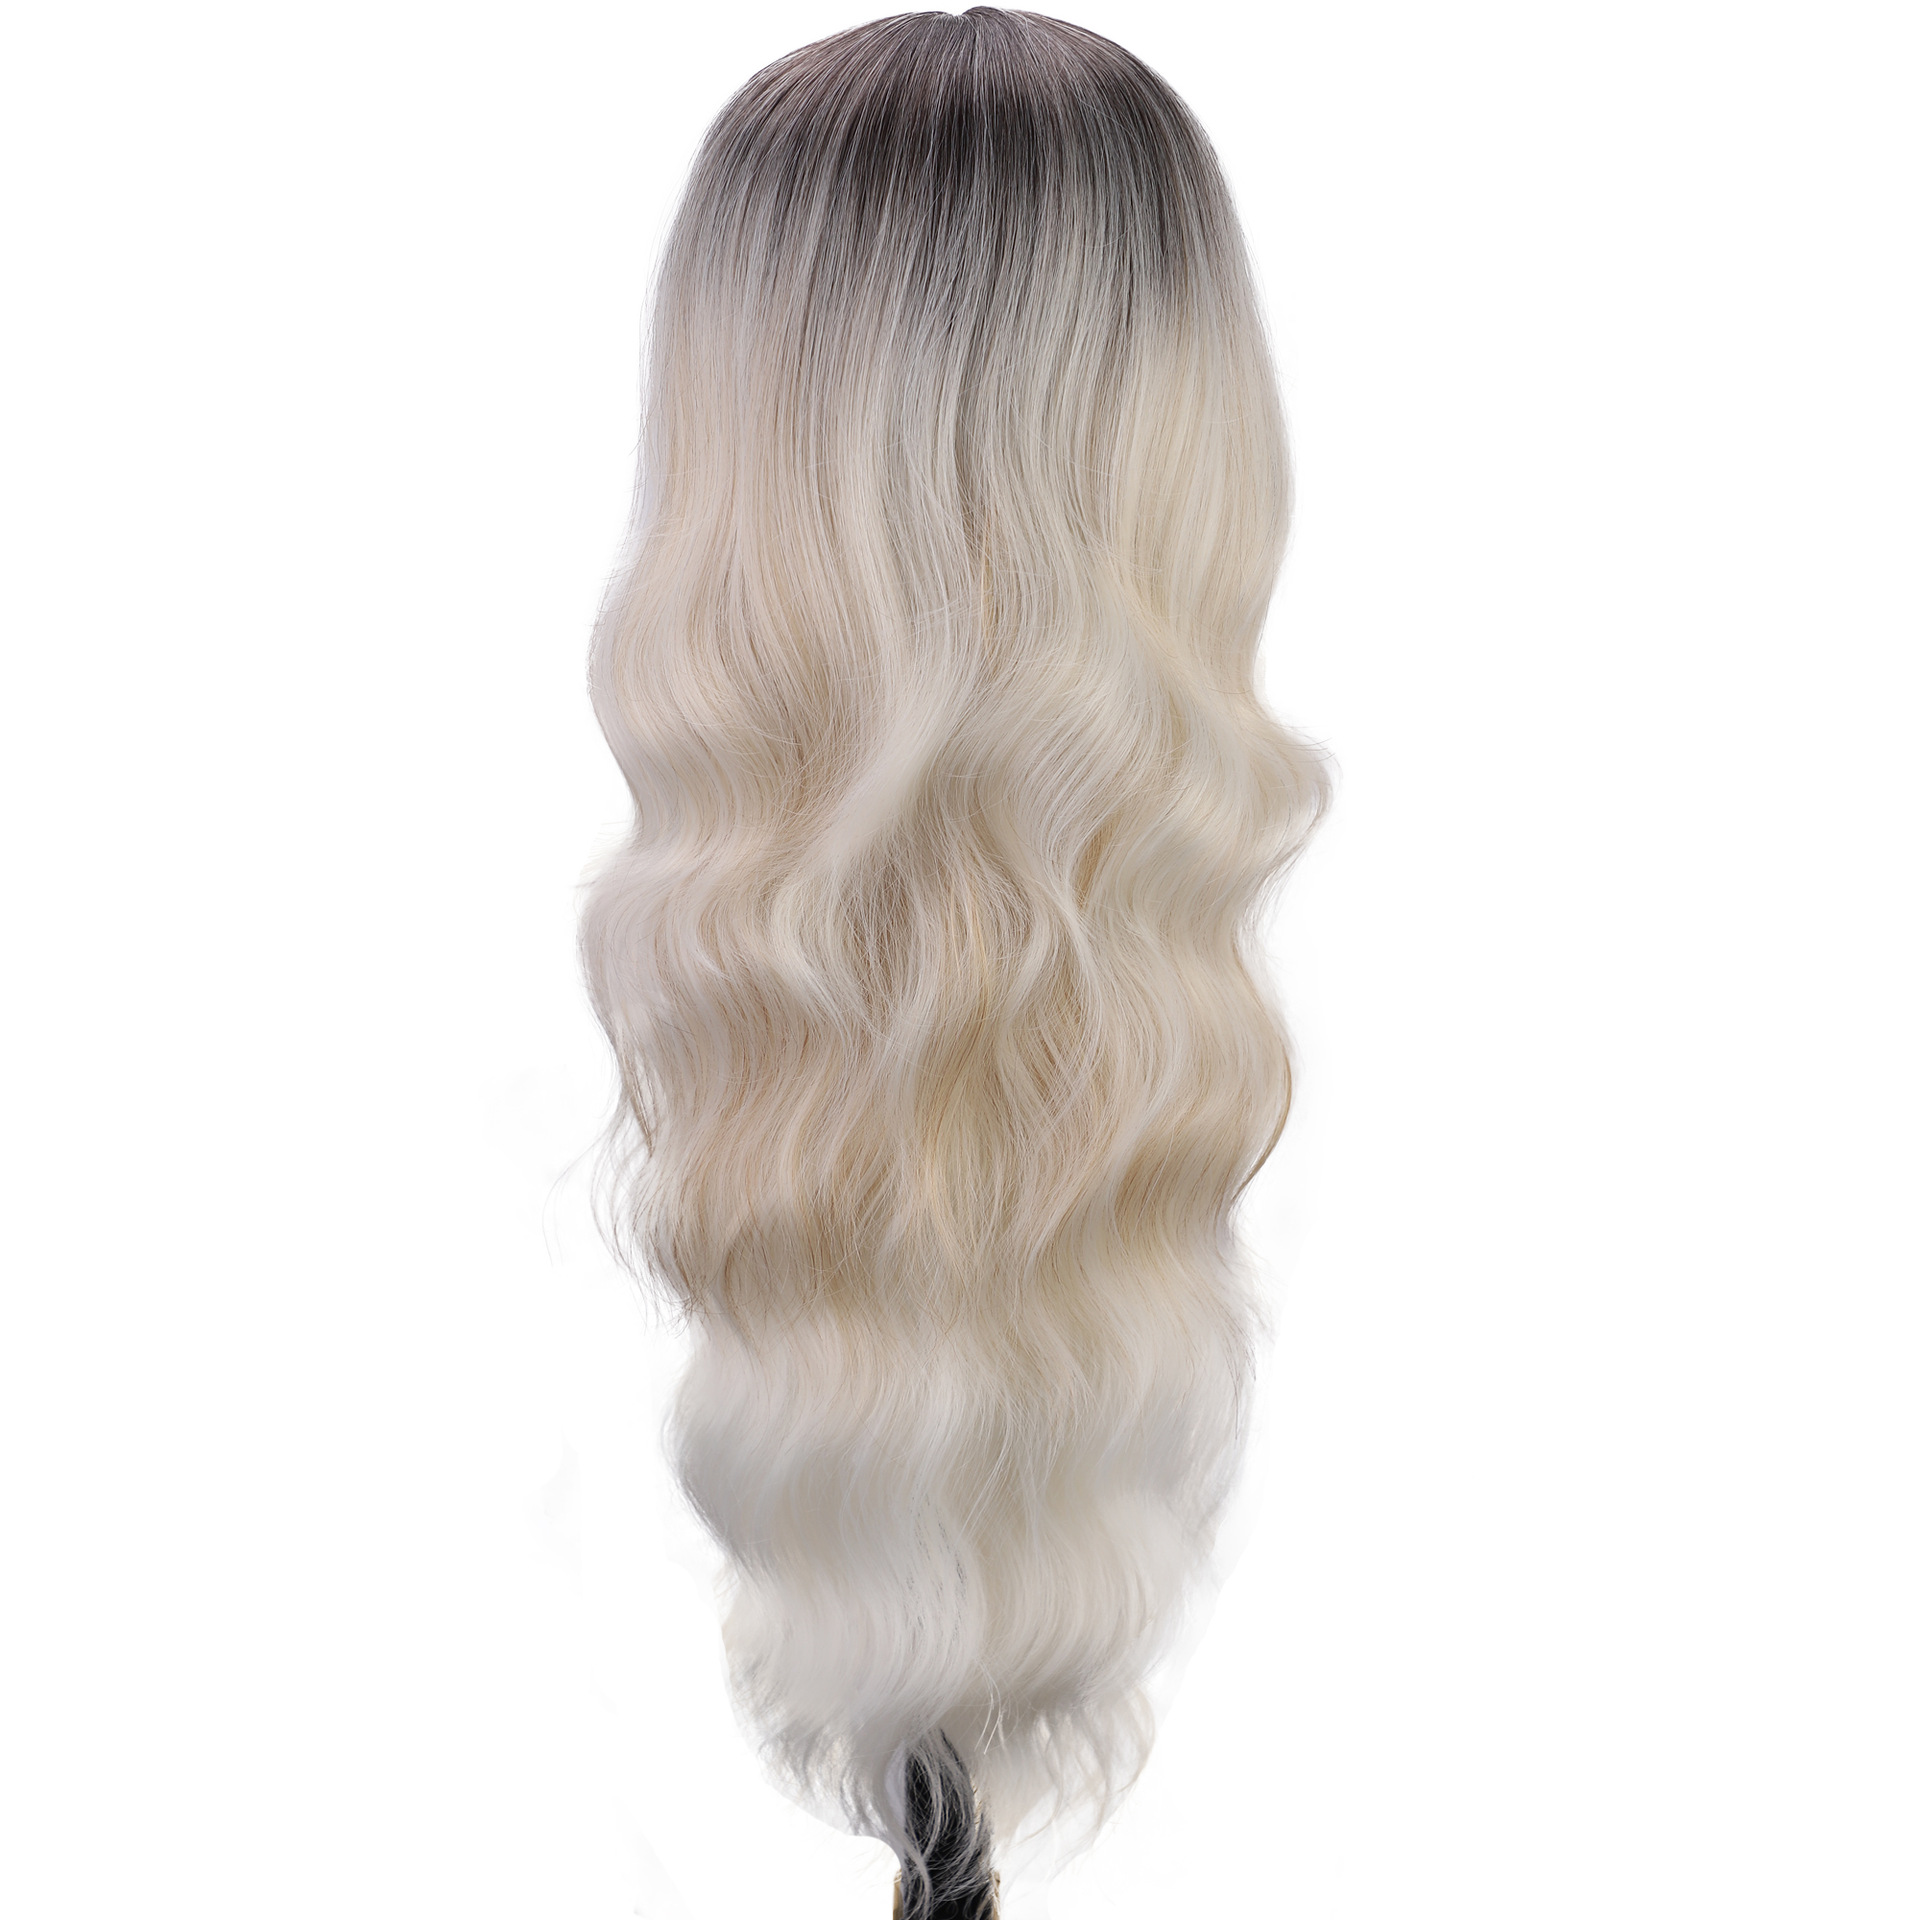 Front lace wig headband #95145